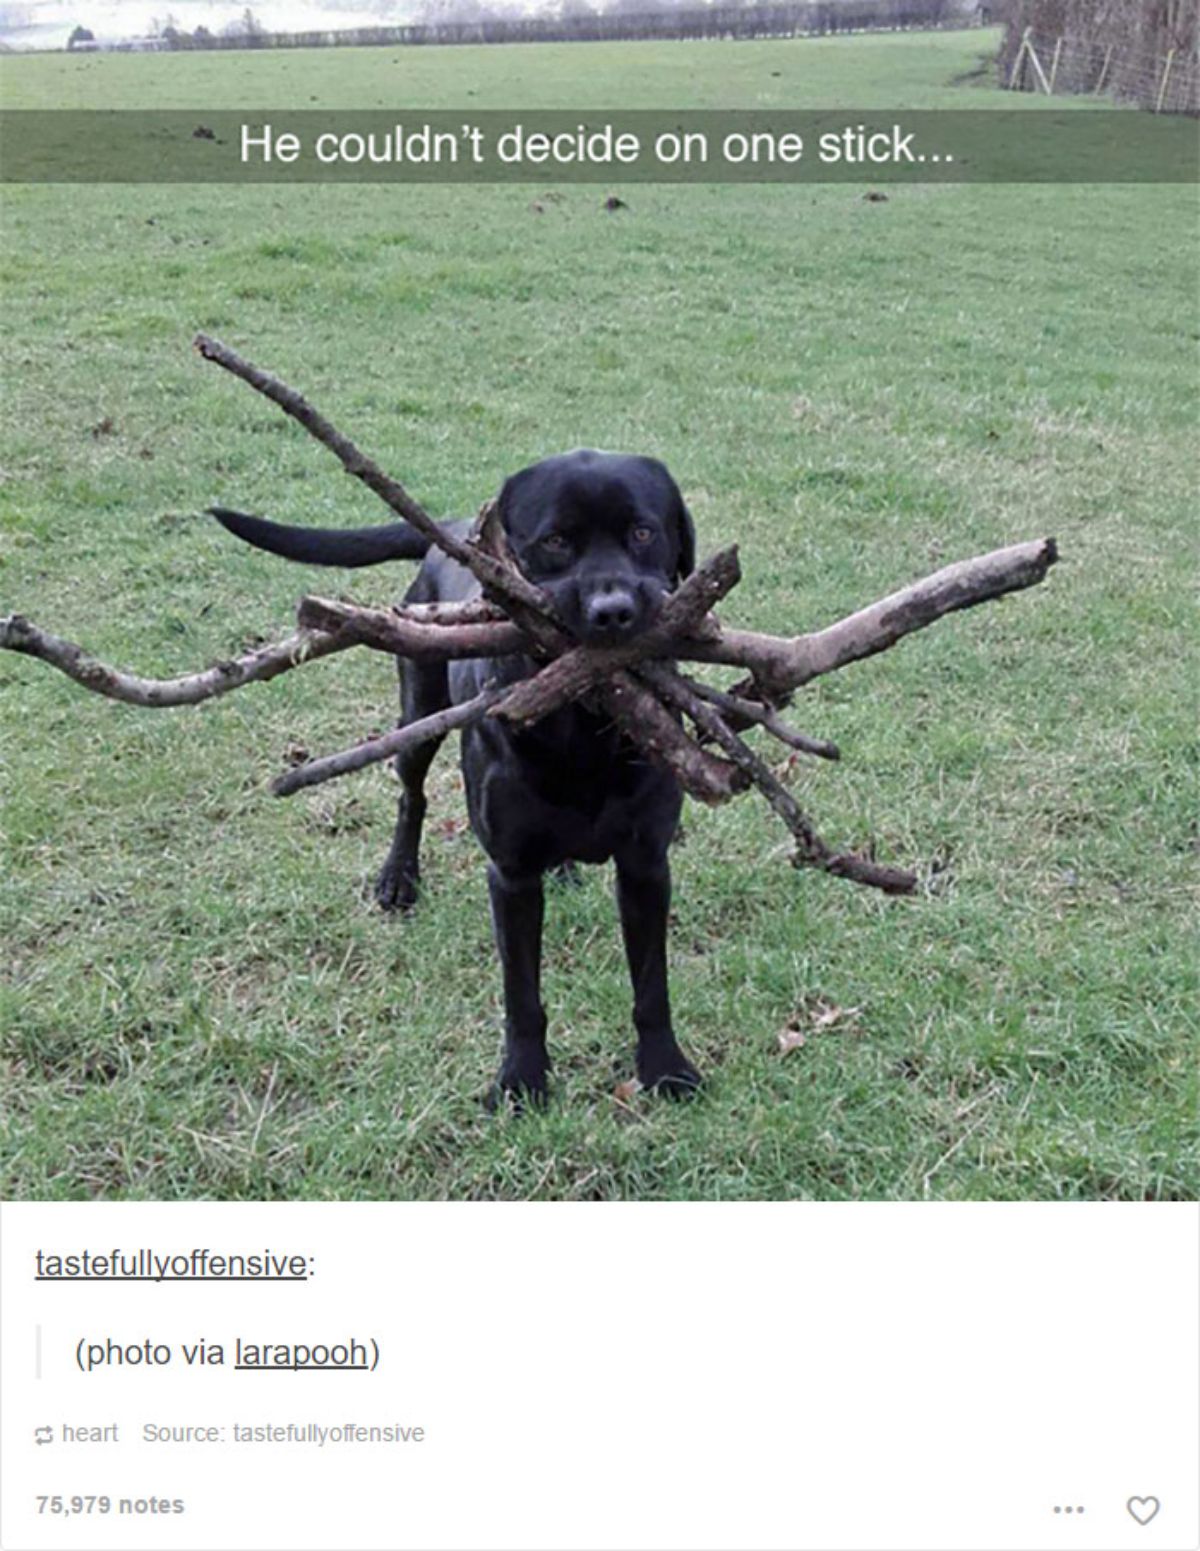 tumblr post of black labrador holding a huge stack of sticks in the mouth with caption saying he couldn't decide on one stick